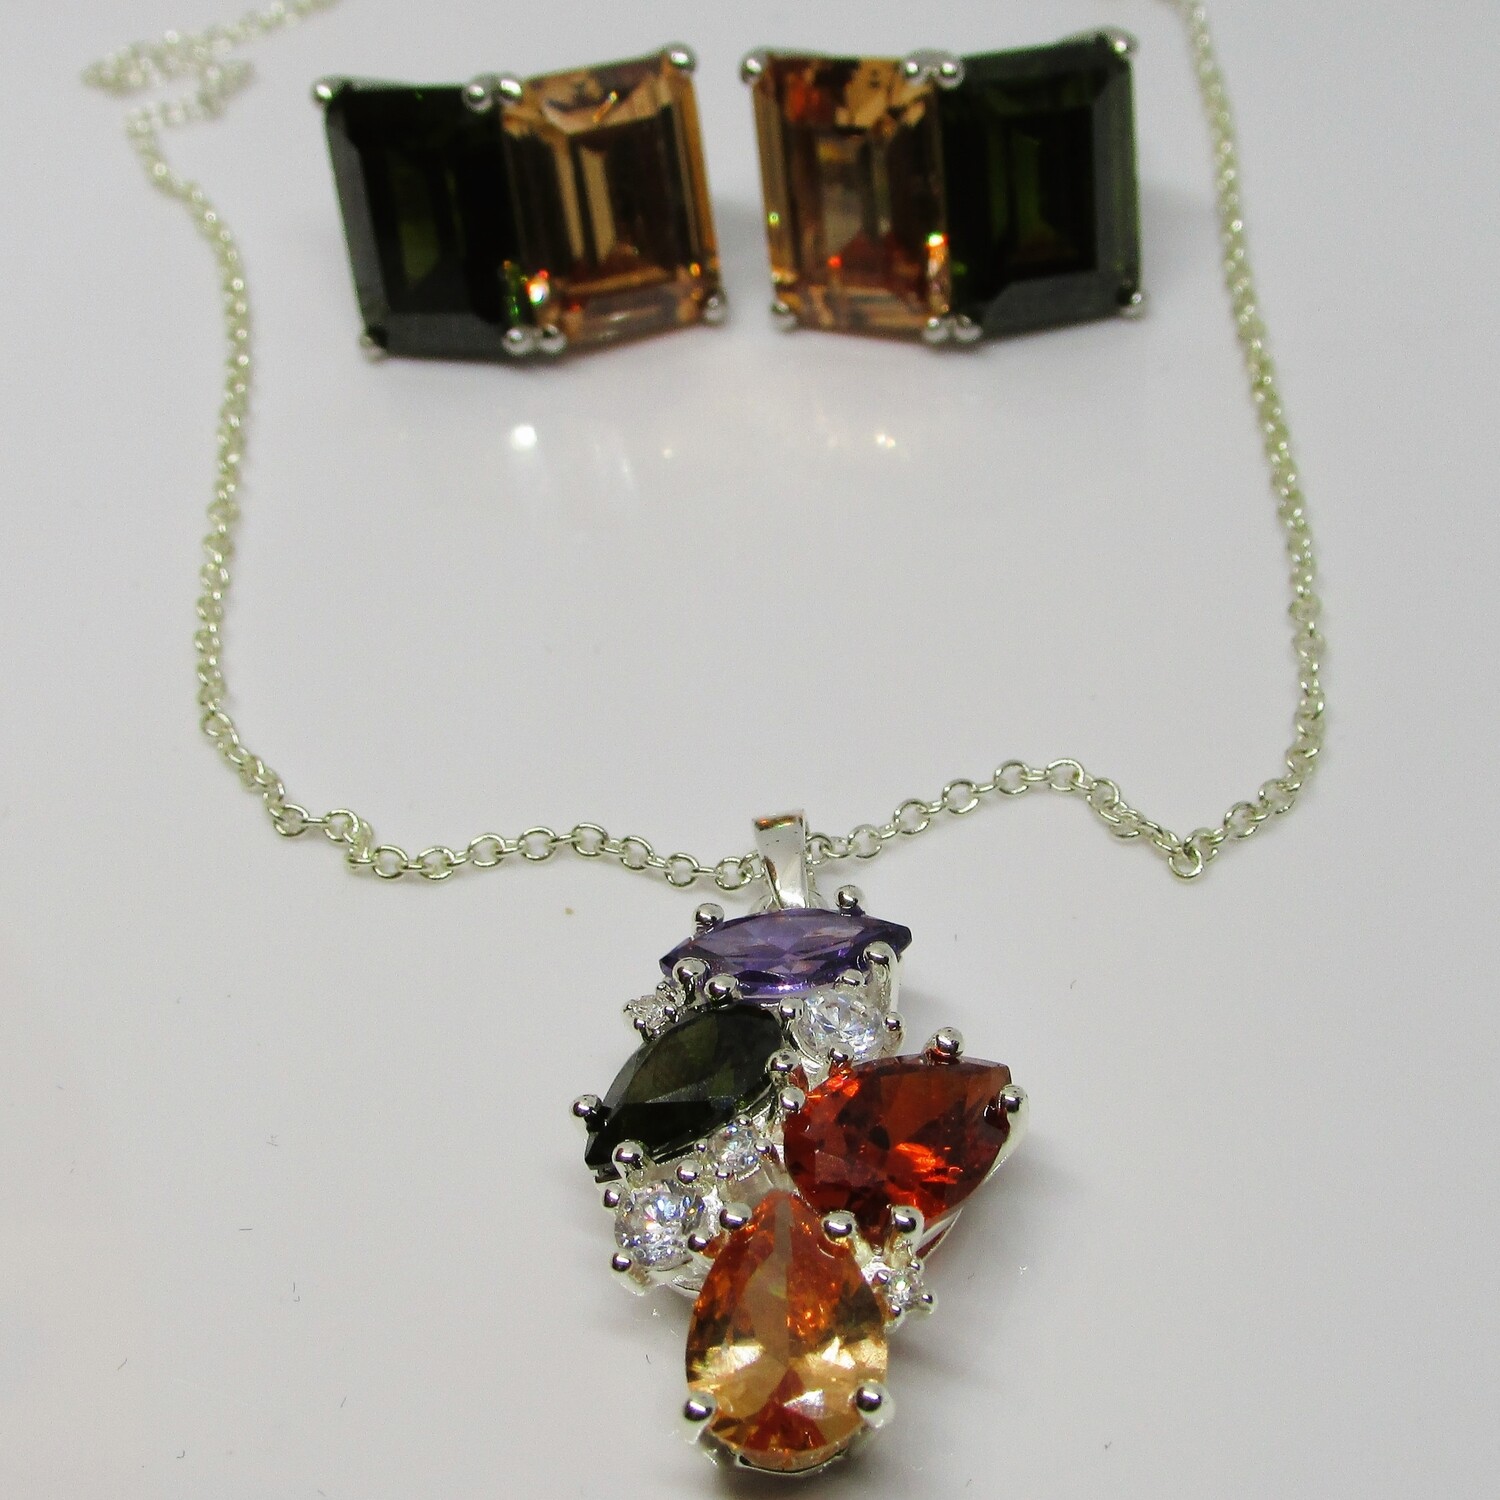 Avon's Dare to Dazzle Multi-Coloured Crystal Necklace with Emerald Cut Clip-on Earrings c. 2010